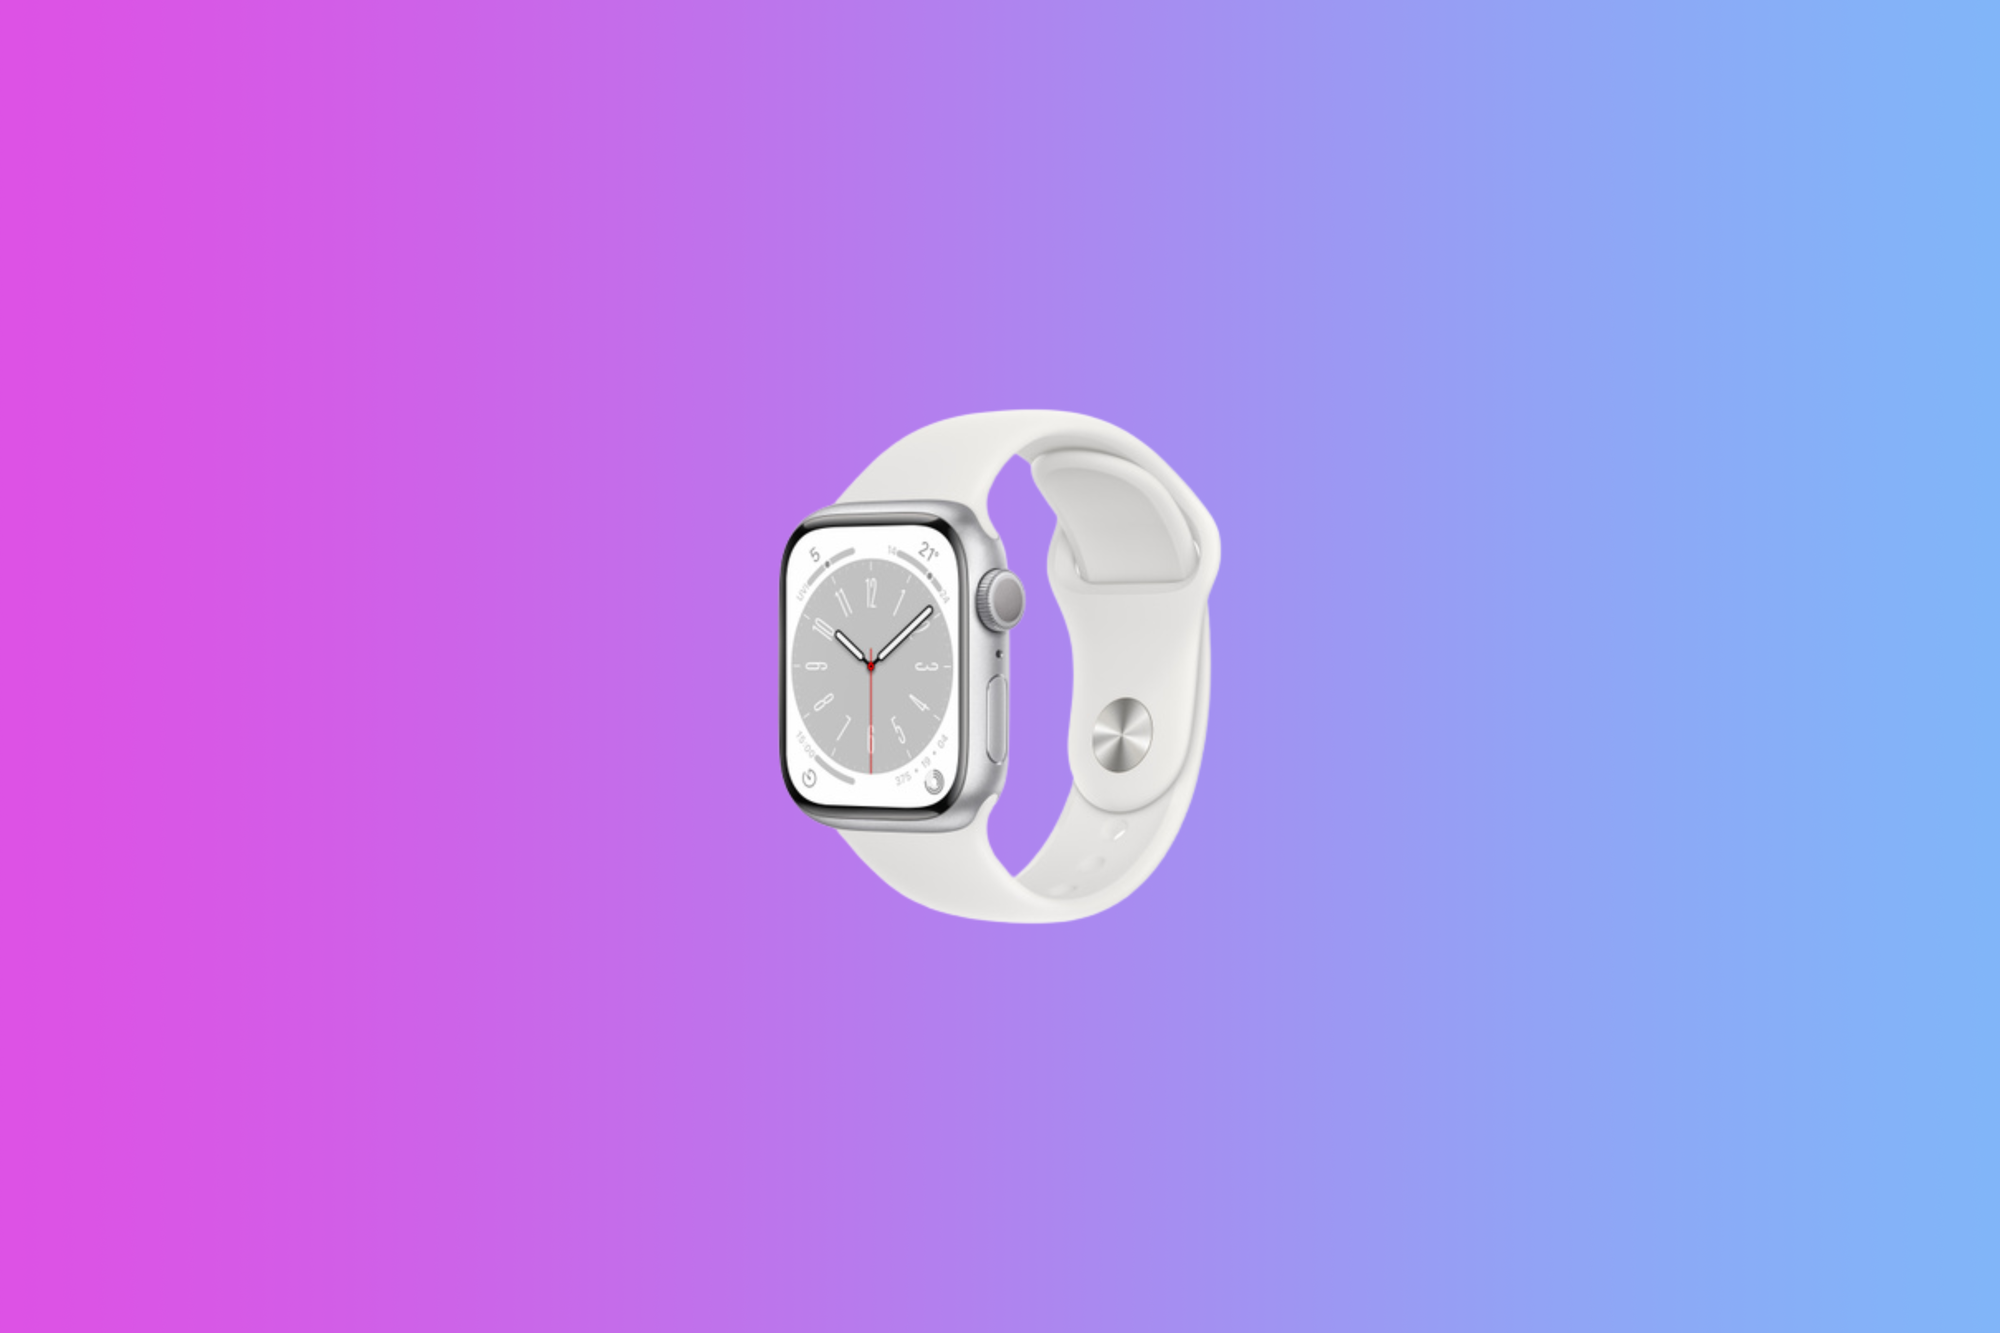 Apple Watch Series 8 with a siilver case and band displayed on a gradient background